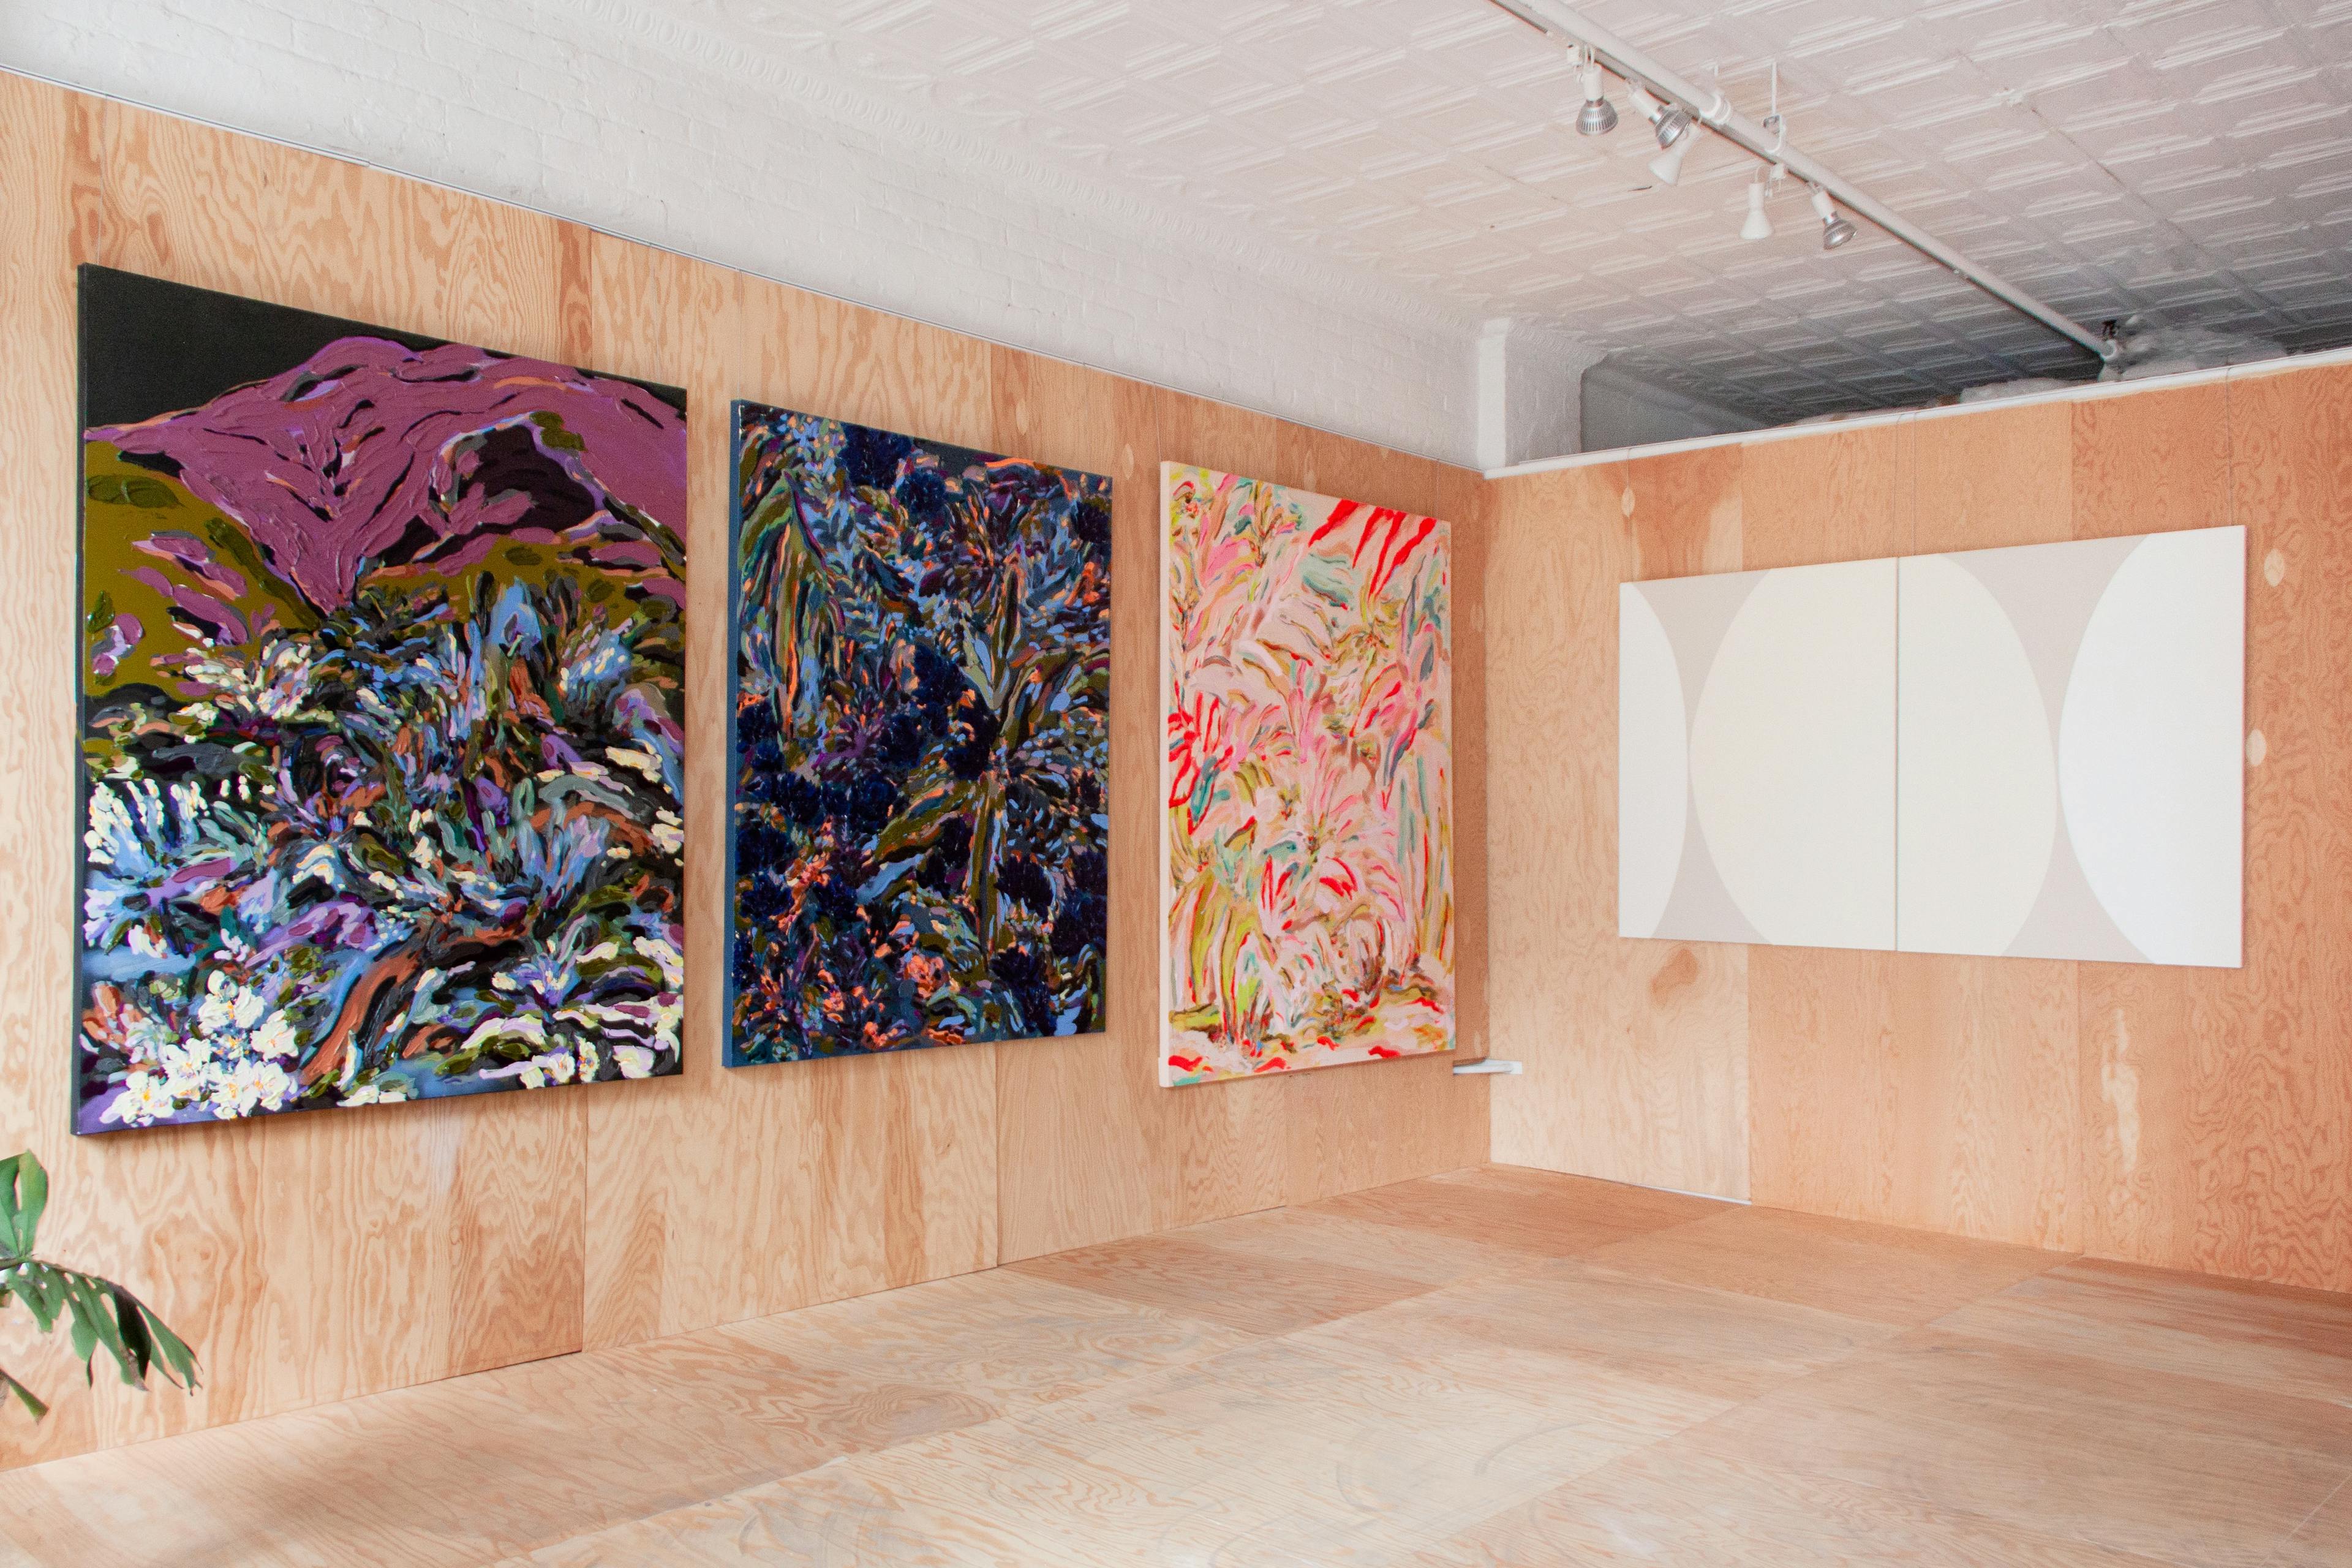 Artwork installed as part of Give and Take, one of Uprise Art's Exhibitions in New York, NY.